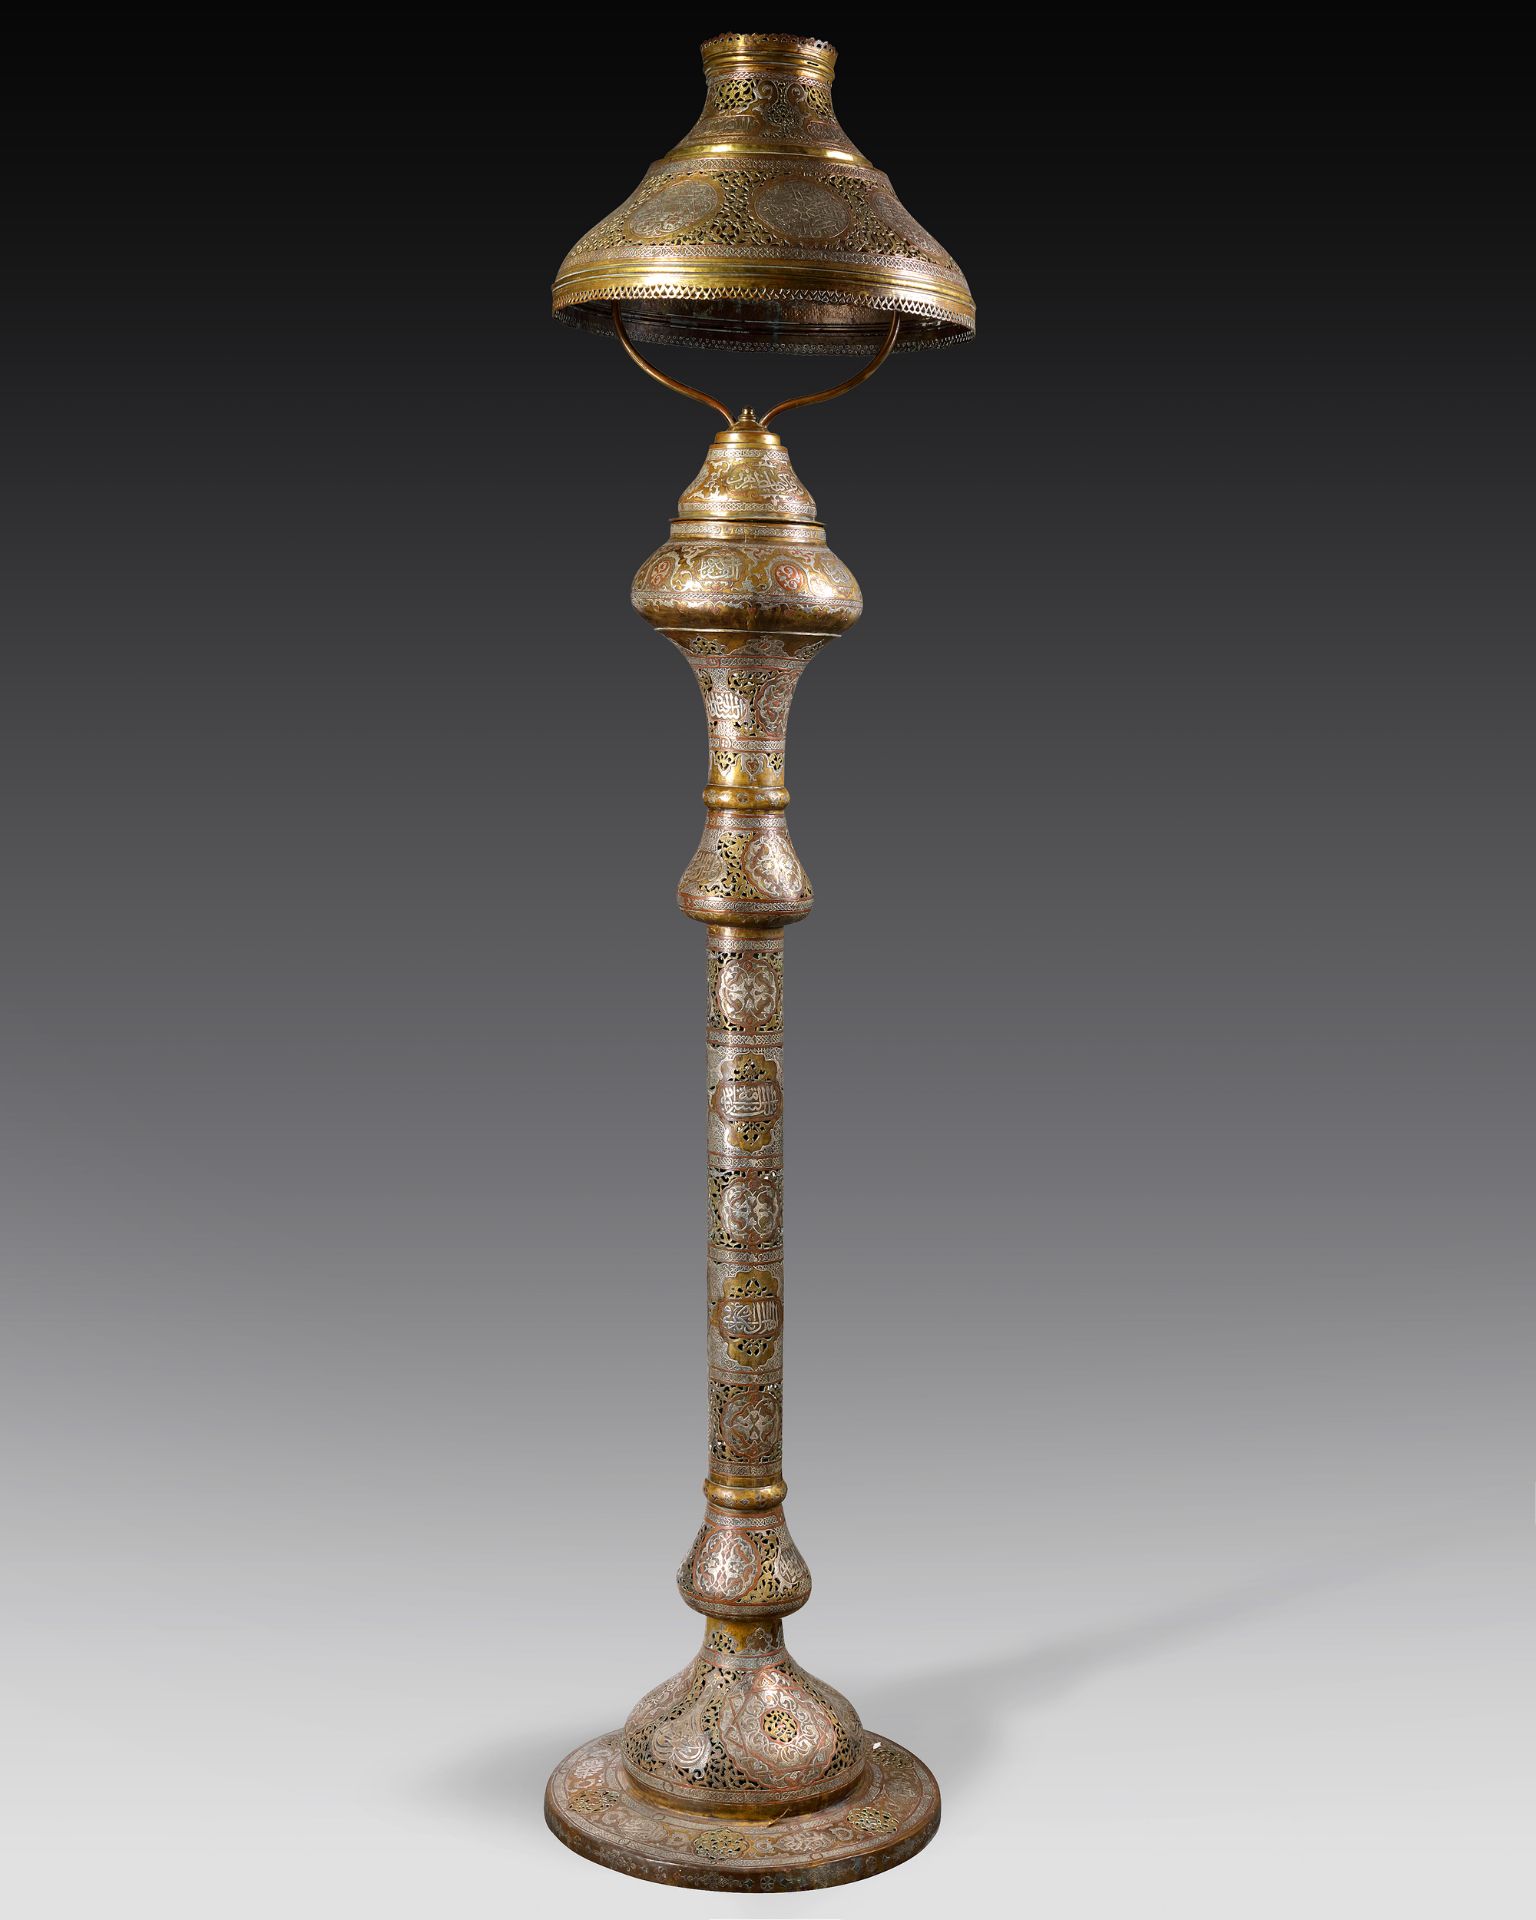 A LARGE ISLAMIC SILVER AND COPPER INLAID LAMP, 19TH CENTURY - Image 3 of 4